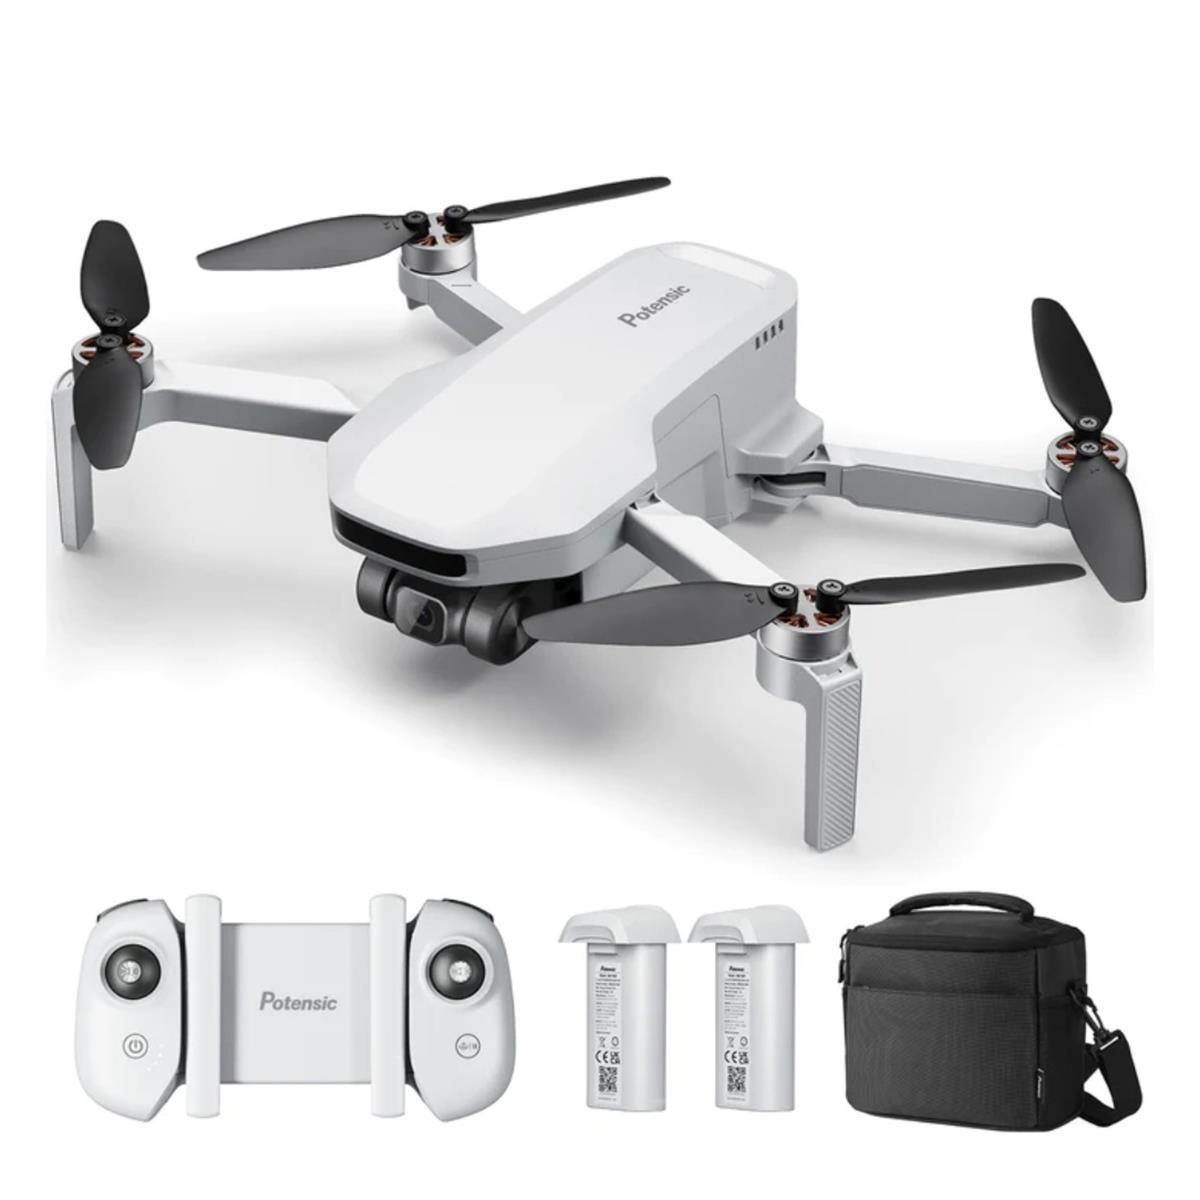 Image of Potensic ATOM SE Foldable GPS Drone with 4K HD EIS Camera Fly More Combo